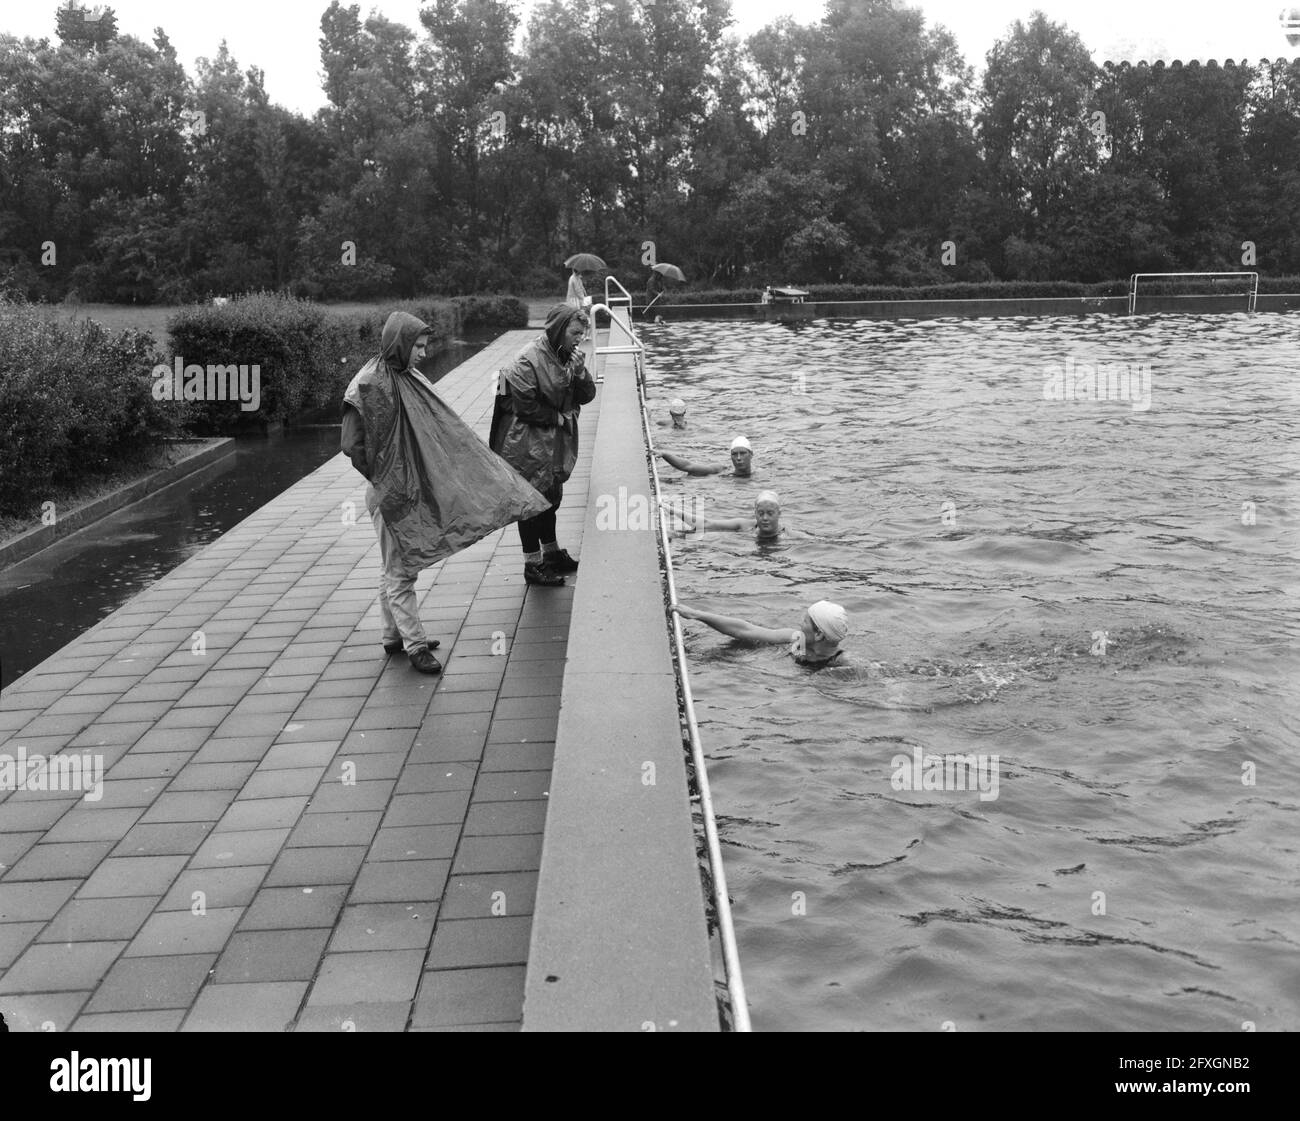 Four Naarden swimmers going to the Olympics from back to front T. Lagerberg, A. den Haan and M. Heemskerk, August 15, 1960, Olympics, The Netherlands, 20th century press agency photo, news to remember, documentary, historic photography 1945-1990, visual stories, human history of the Twentieth Century, capturing moments in time Stock Photo